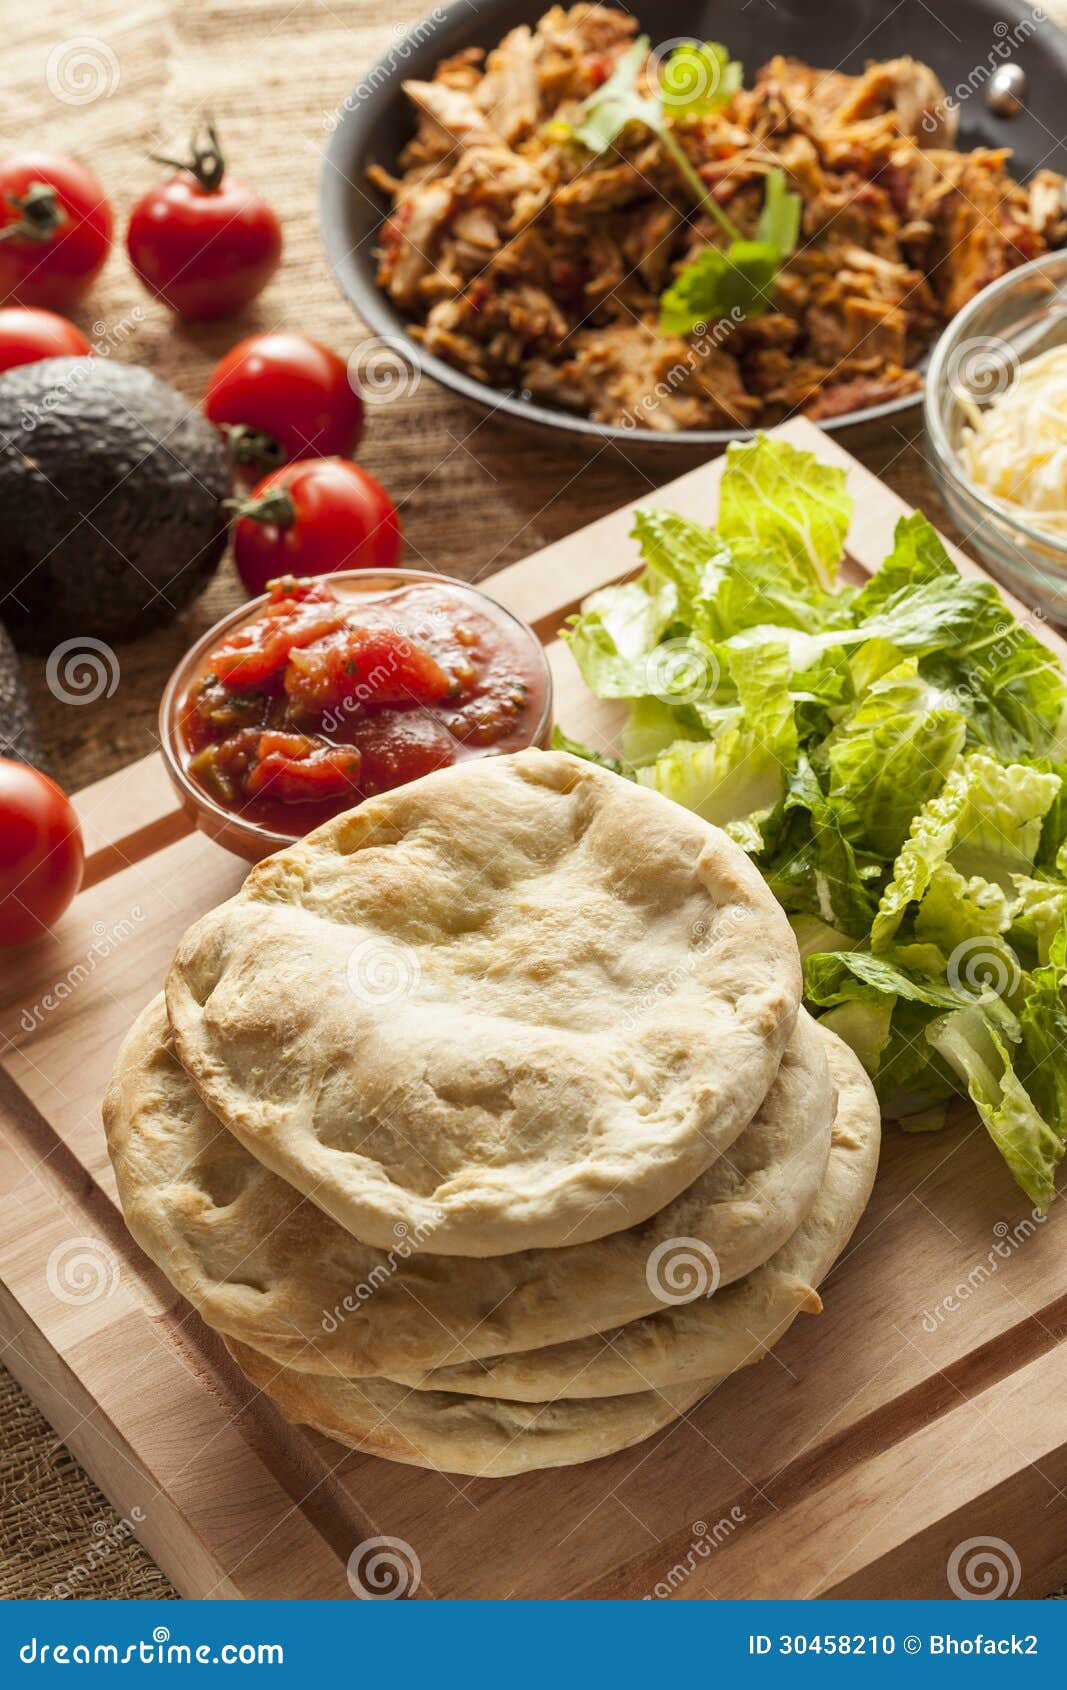 Homemade Mexican Flatbread Taco with Meat Stock Photo - Image of pita ...